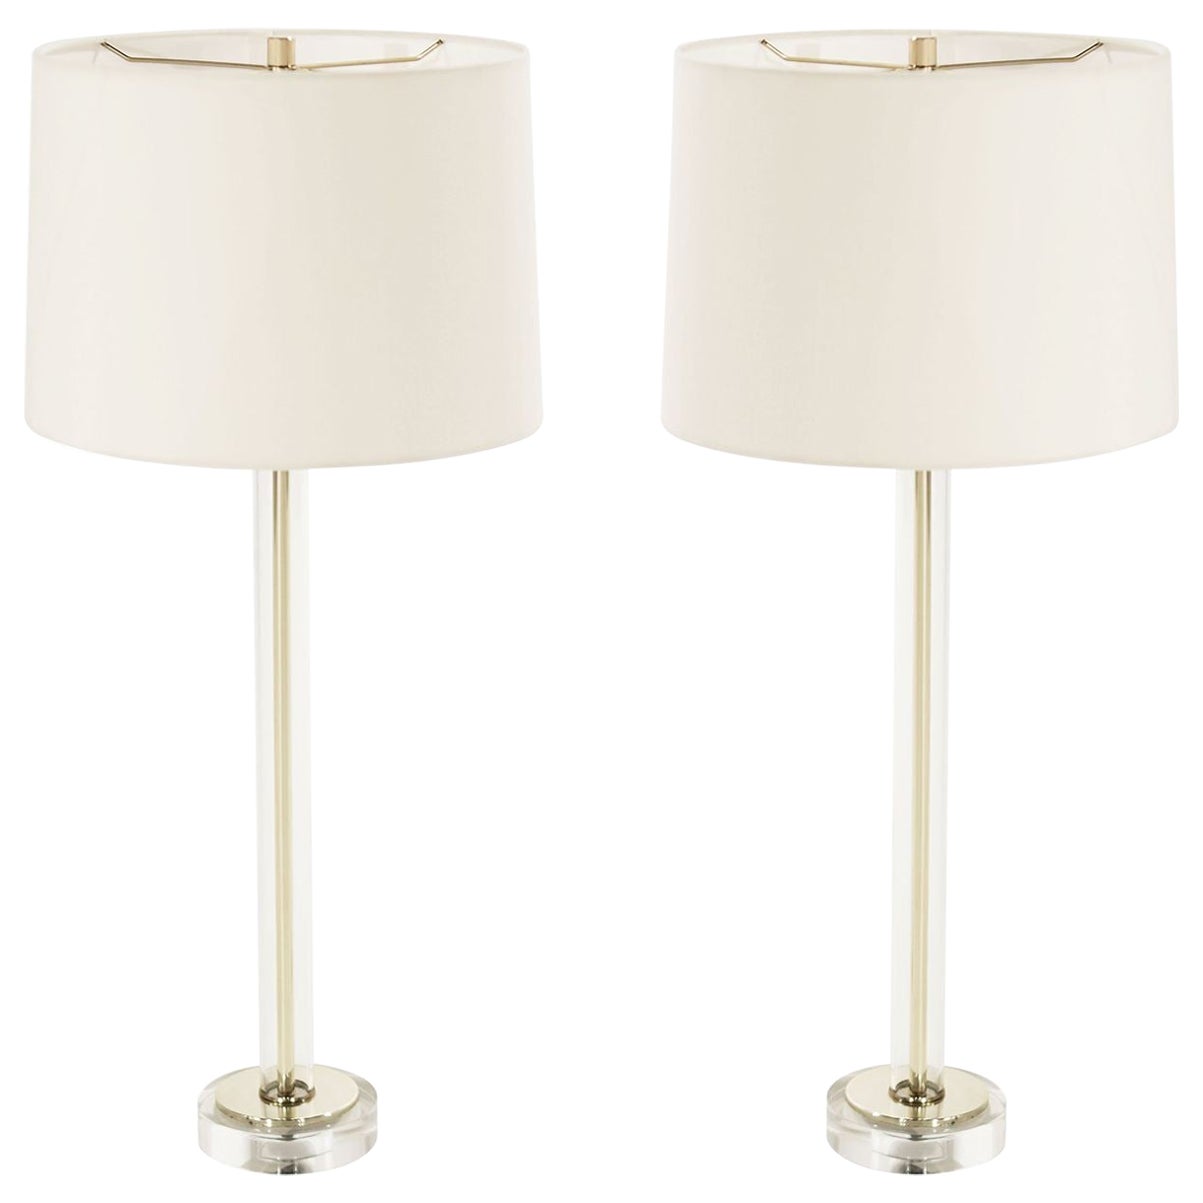 Glass and Brass Table Lamps, C. 1960s For Sale